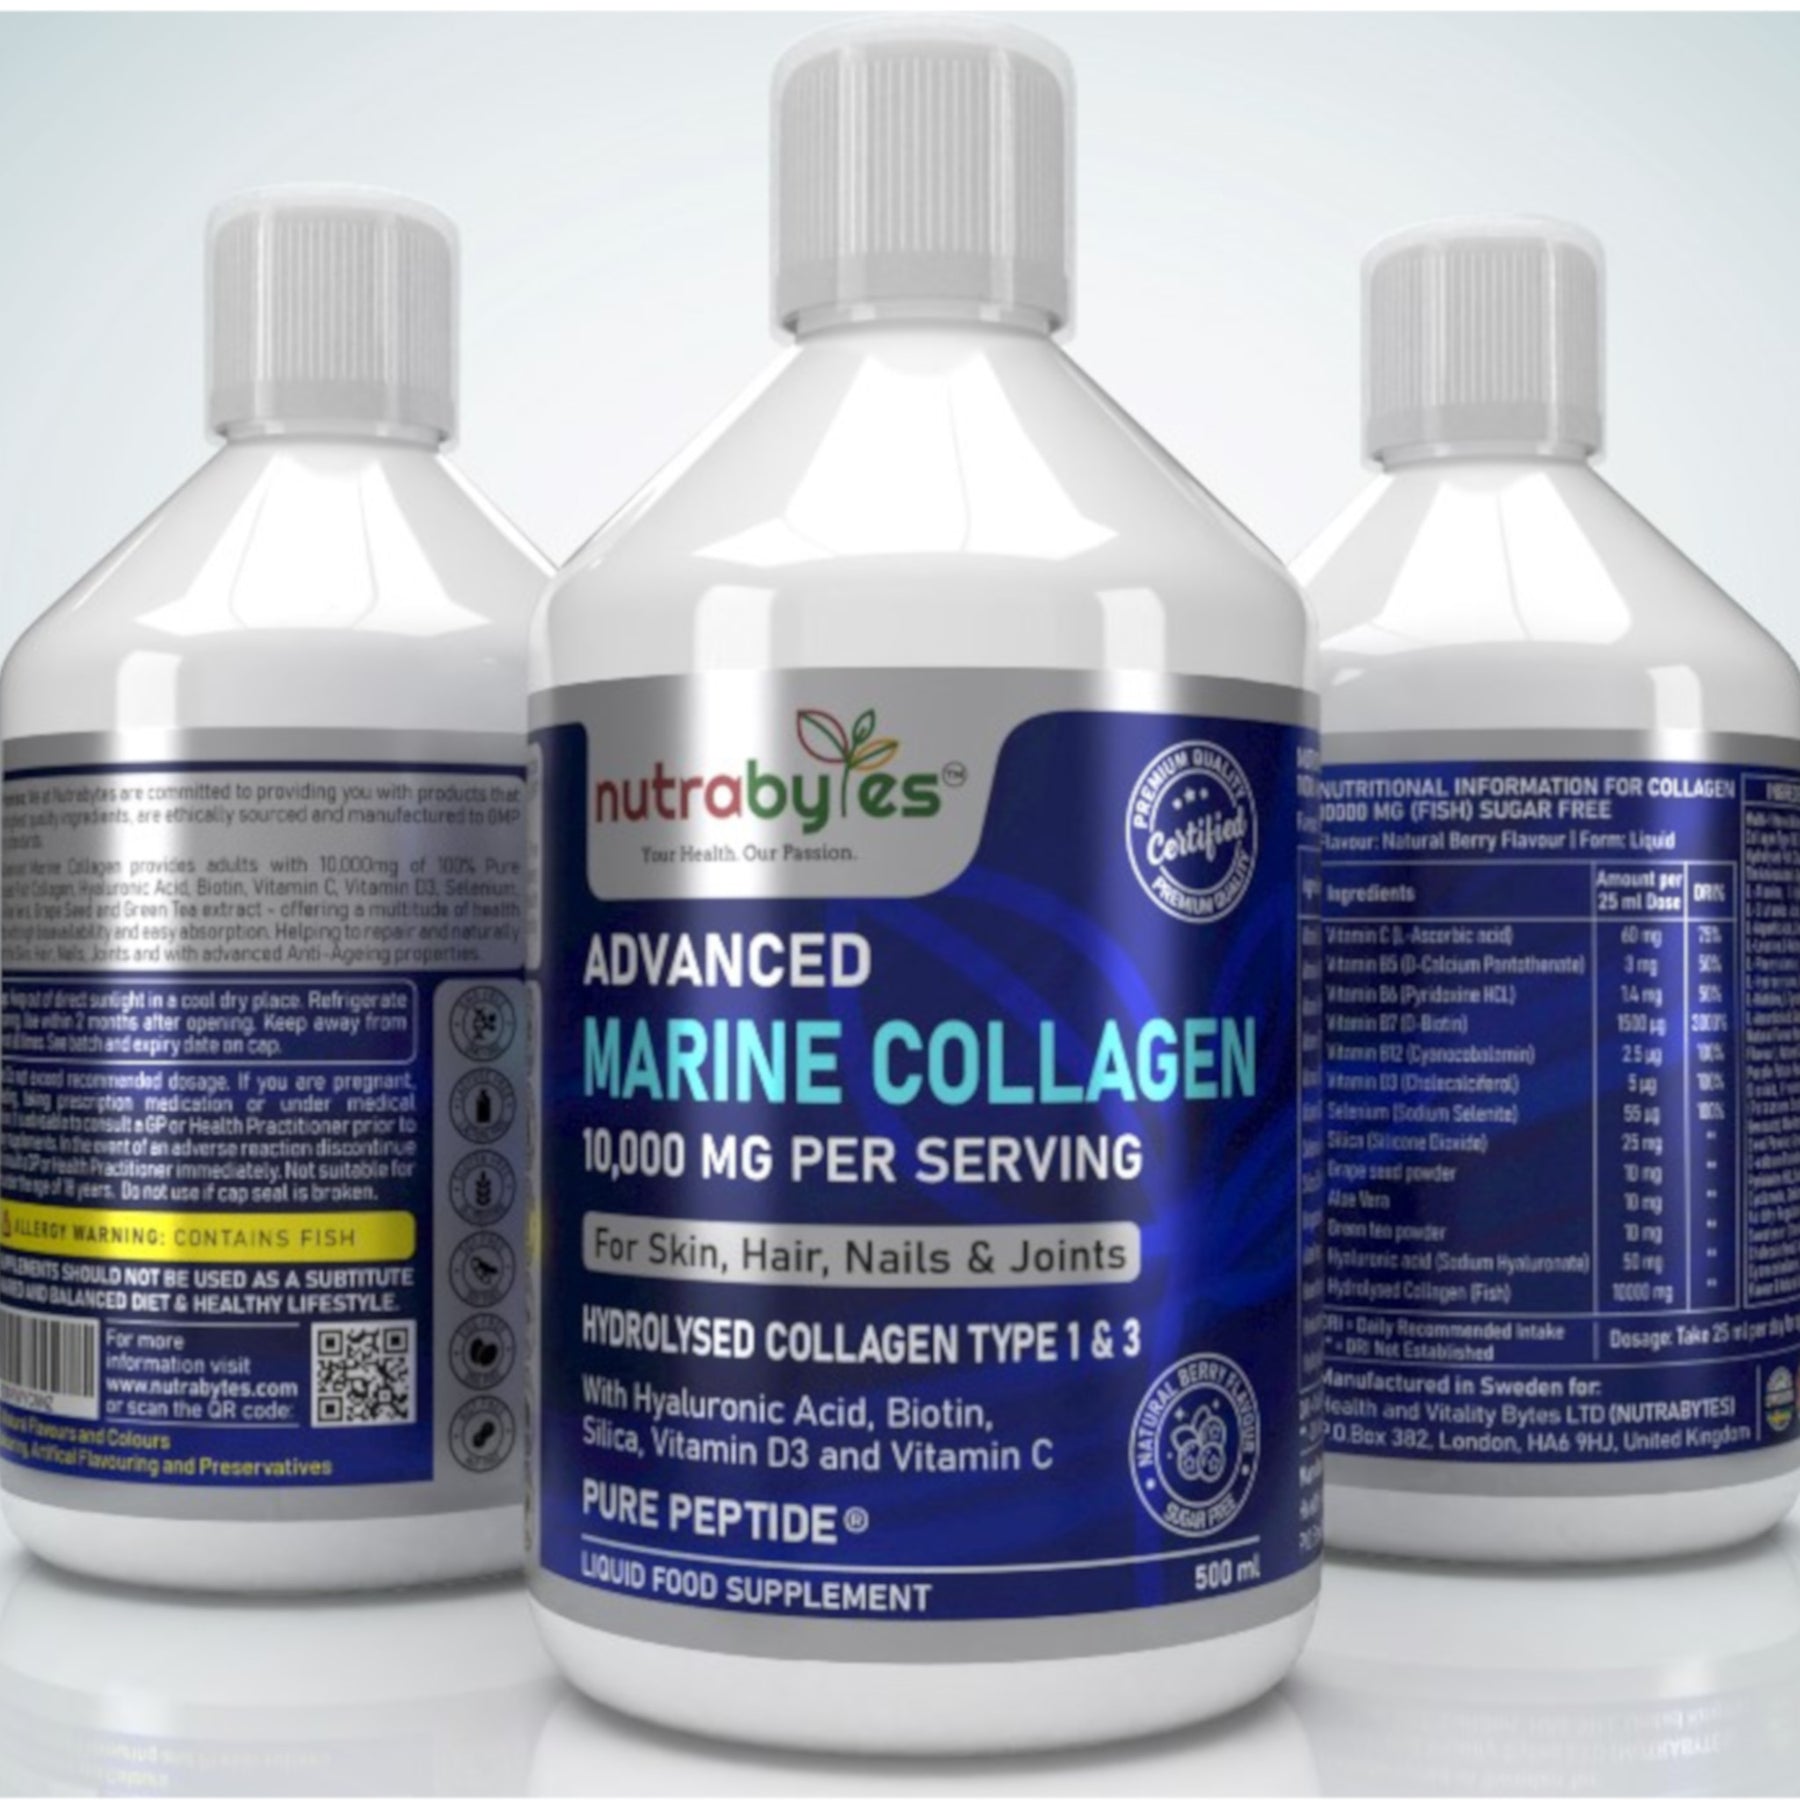 Liquid Marine Collagen 10,000 mg with Hyaluronic Acid, Biotin, Silica, Vitamin C and D3, Sugar Free (Collagen Types 1 and 3)